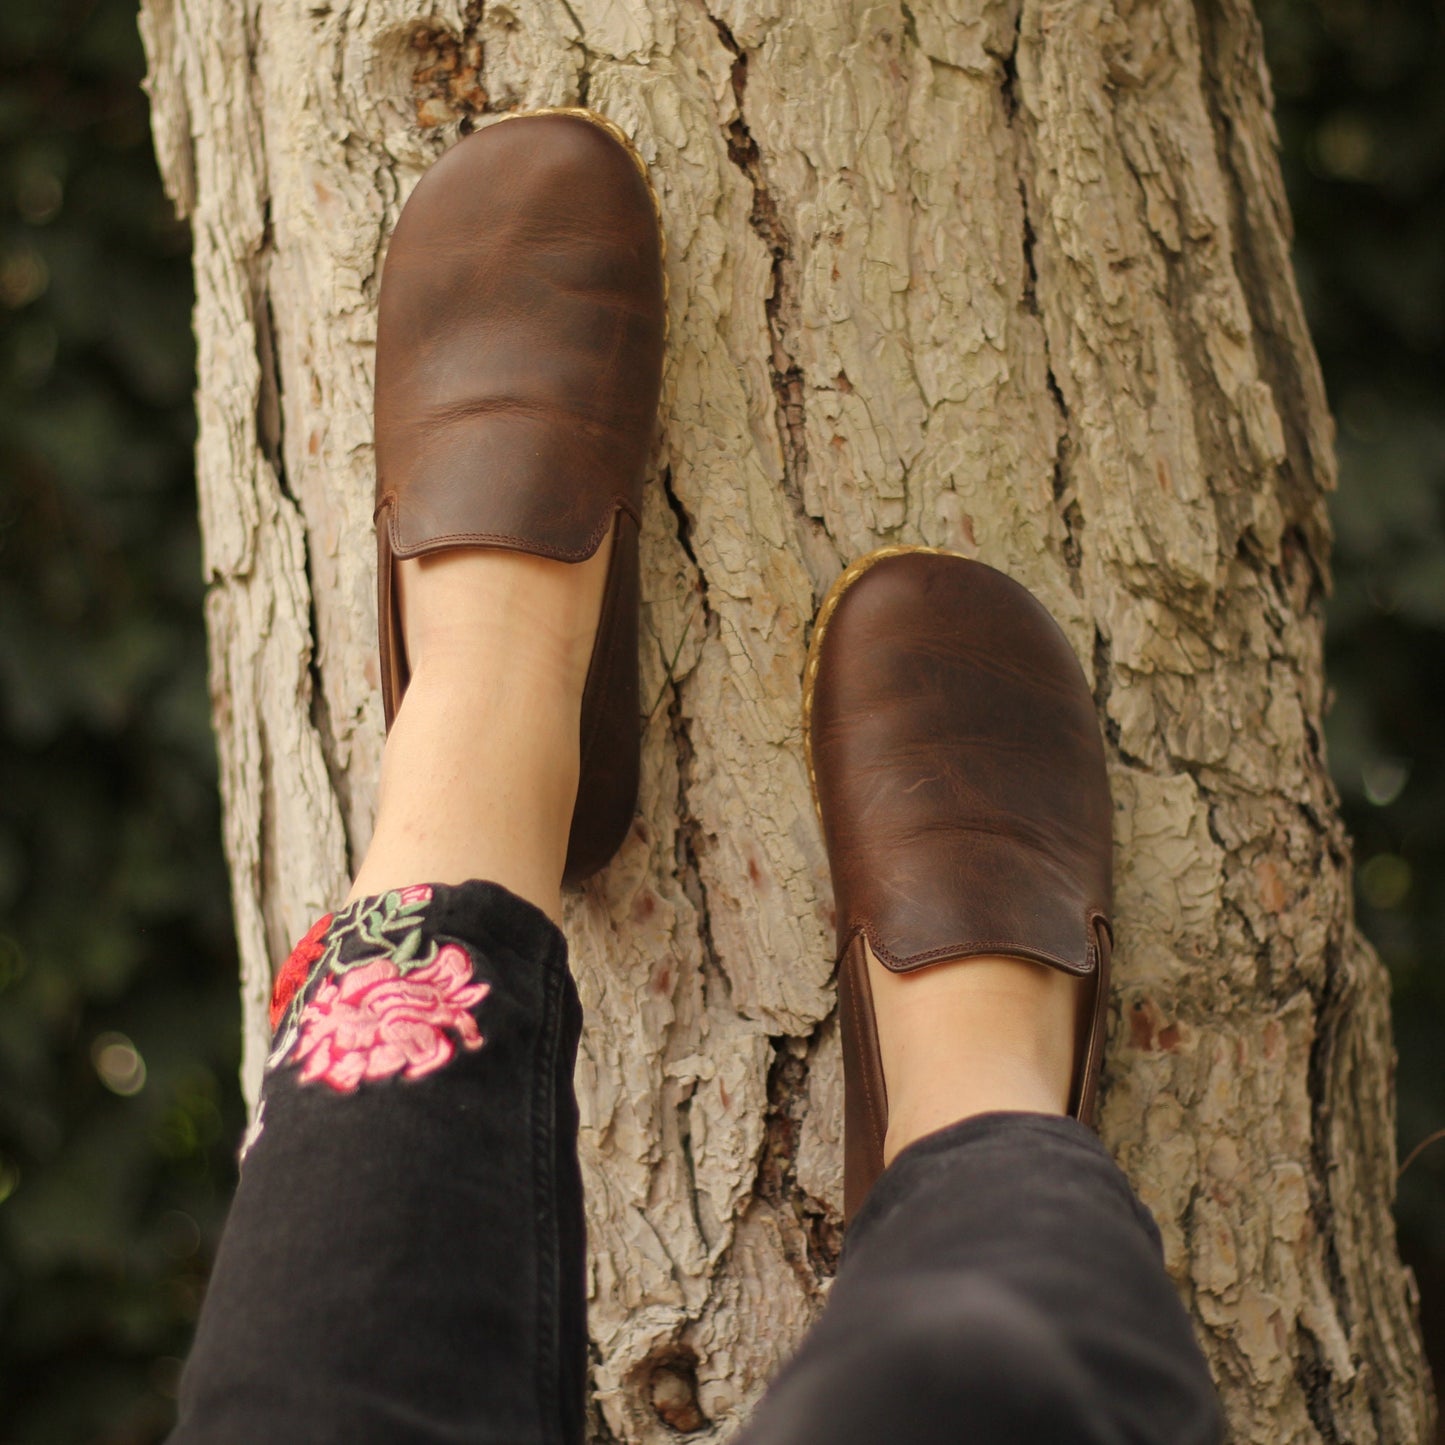 Women - Handmade - Barefoot - Leather Shoes, Modern - Crazy Brown